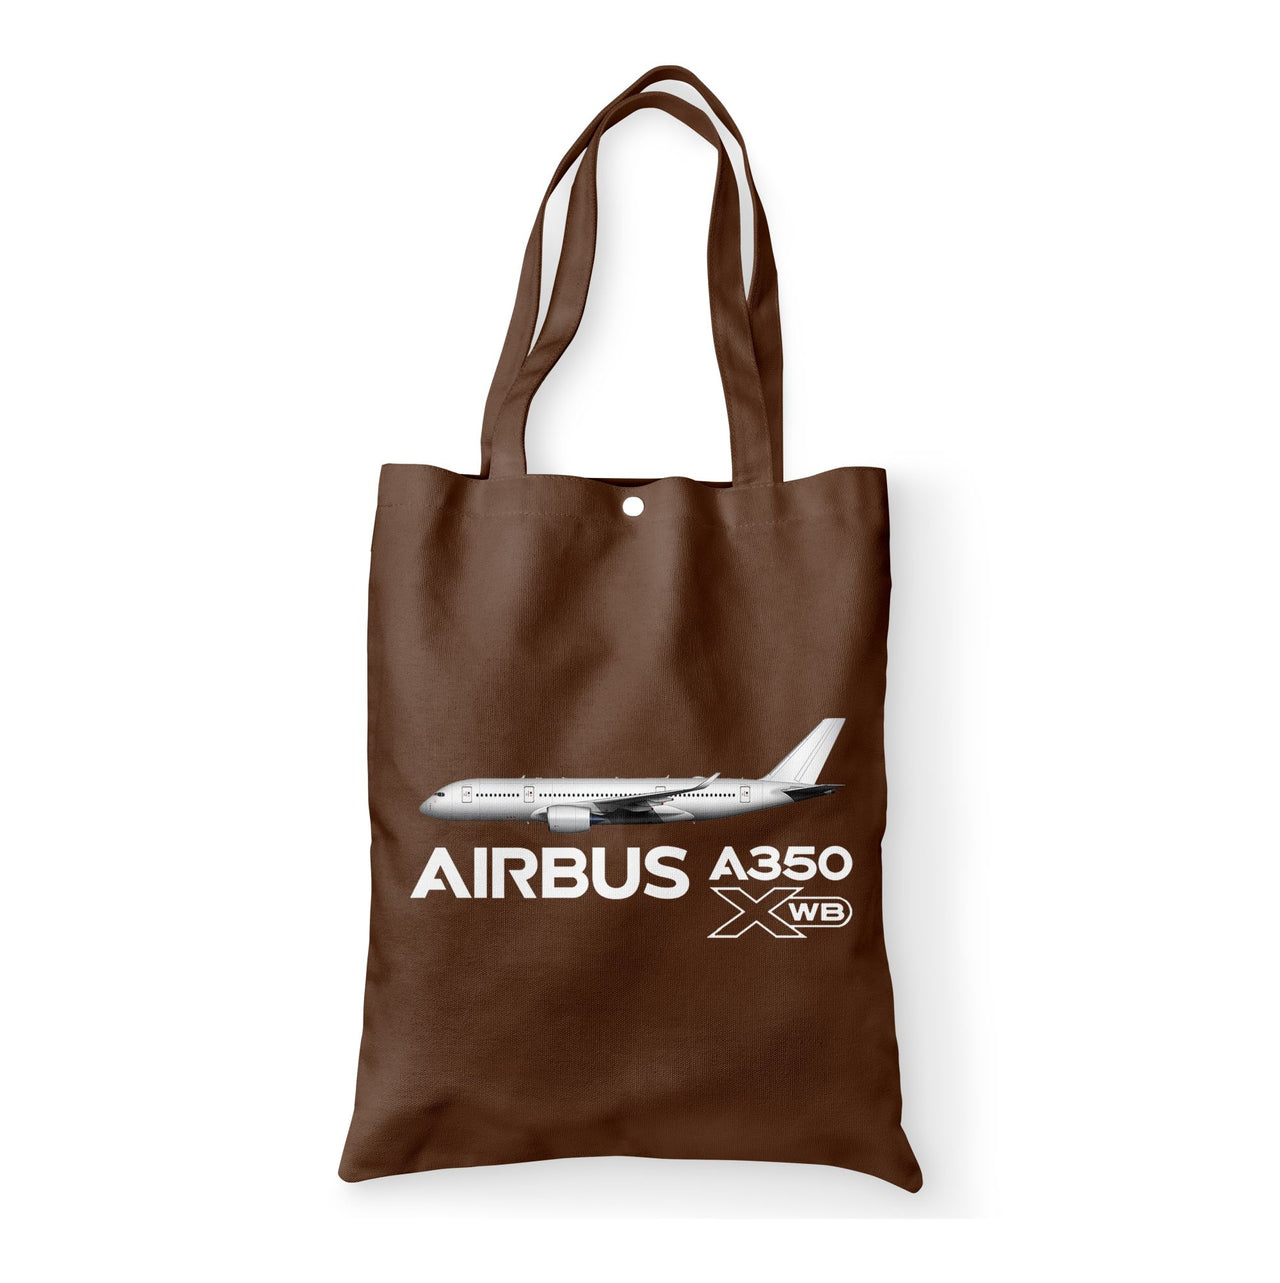 The Airbus A350 WXB Designed Tote Bags